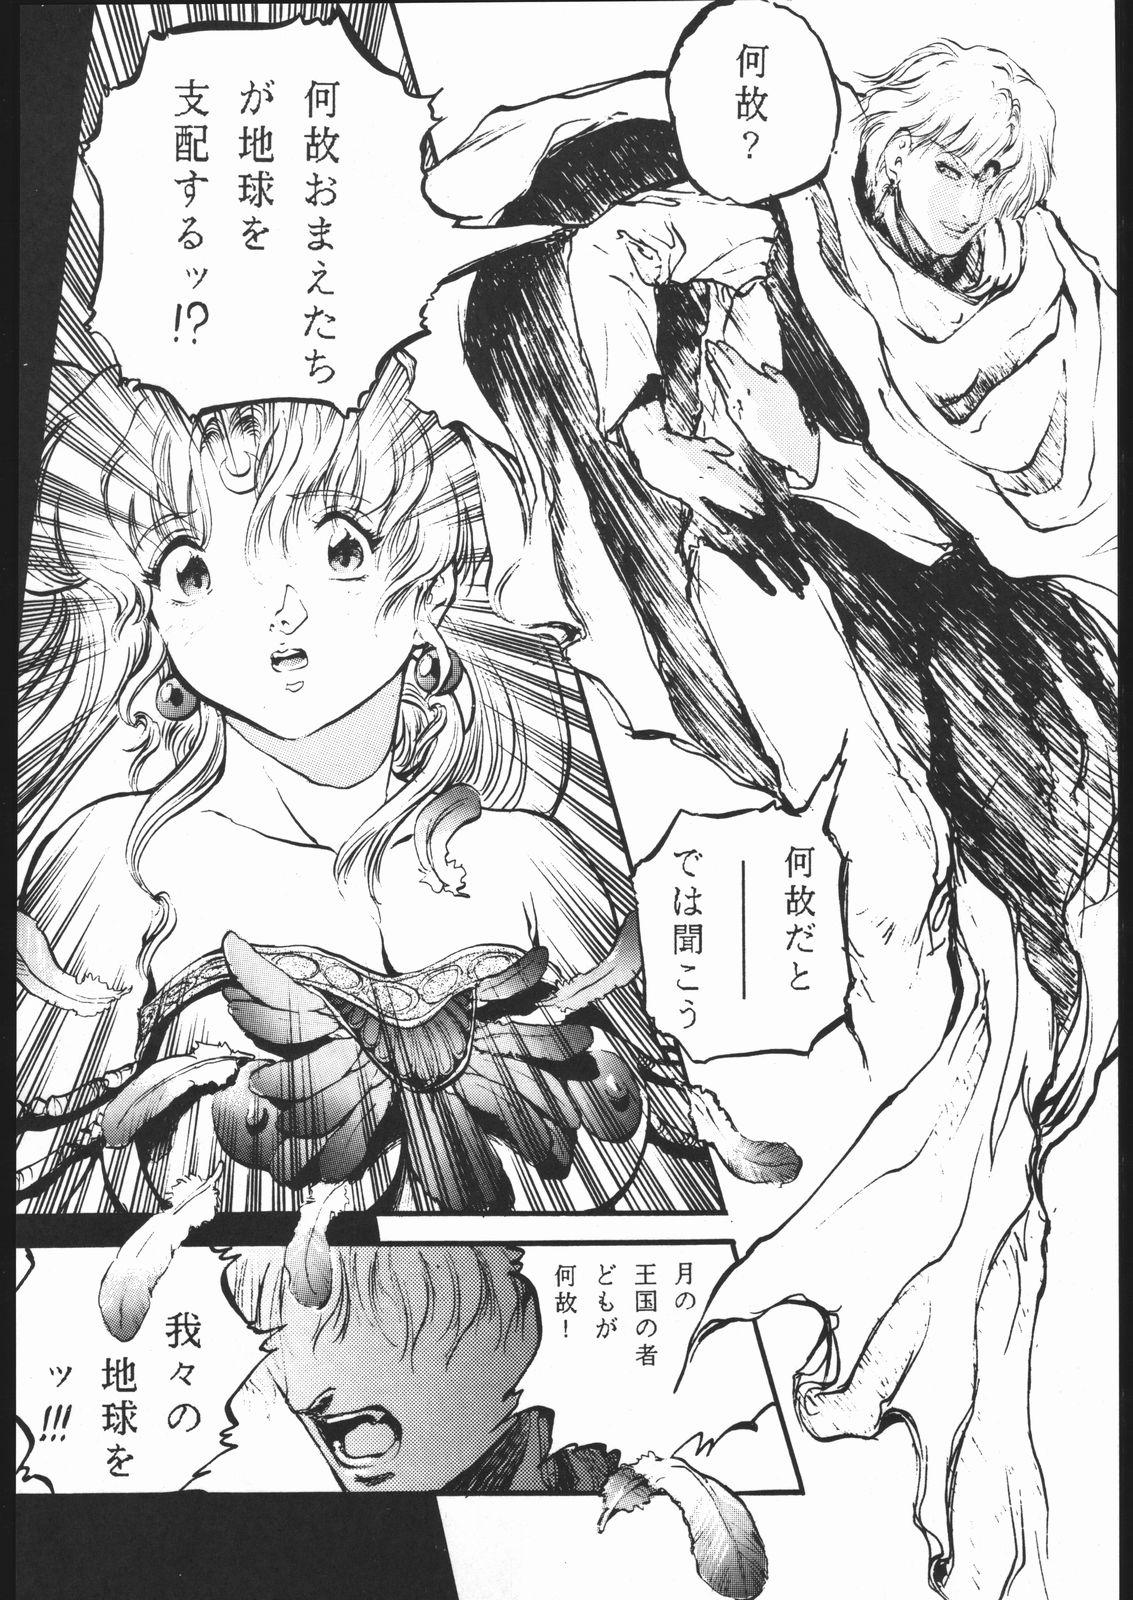 Perverted KATZE 8 - Sailor moon Tenchi muyo Ghost sweeper mikami Giant robo Victory gundam Shemales - Page 7